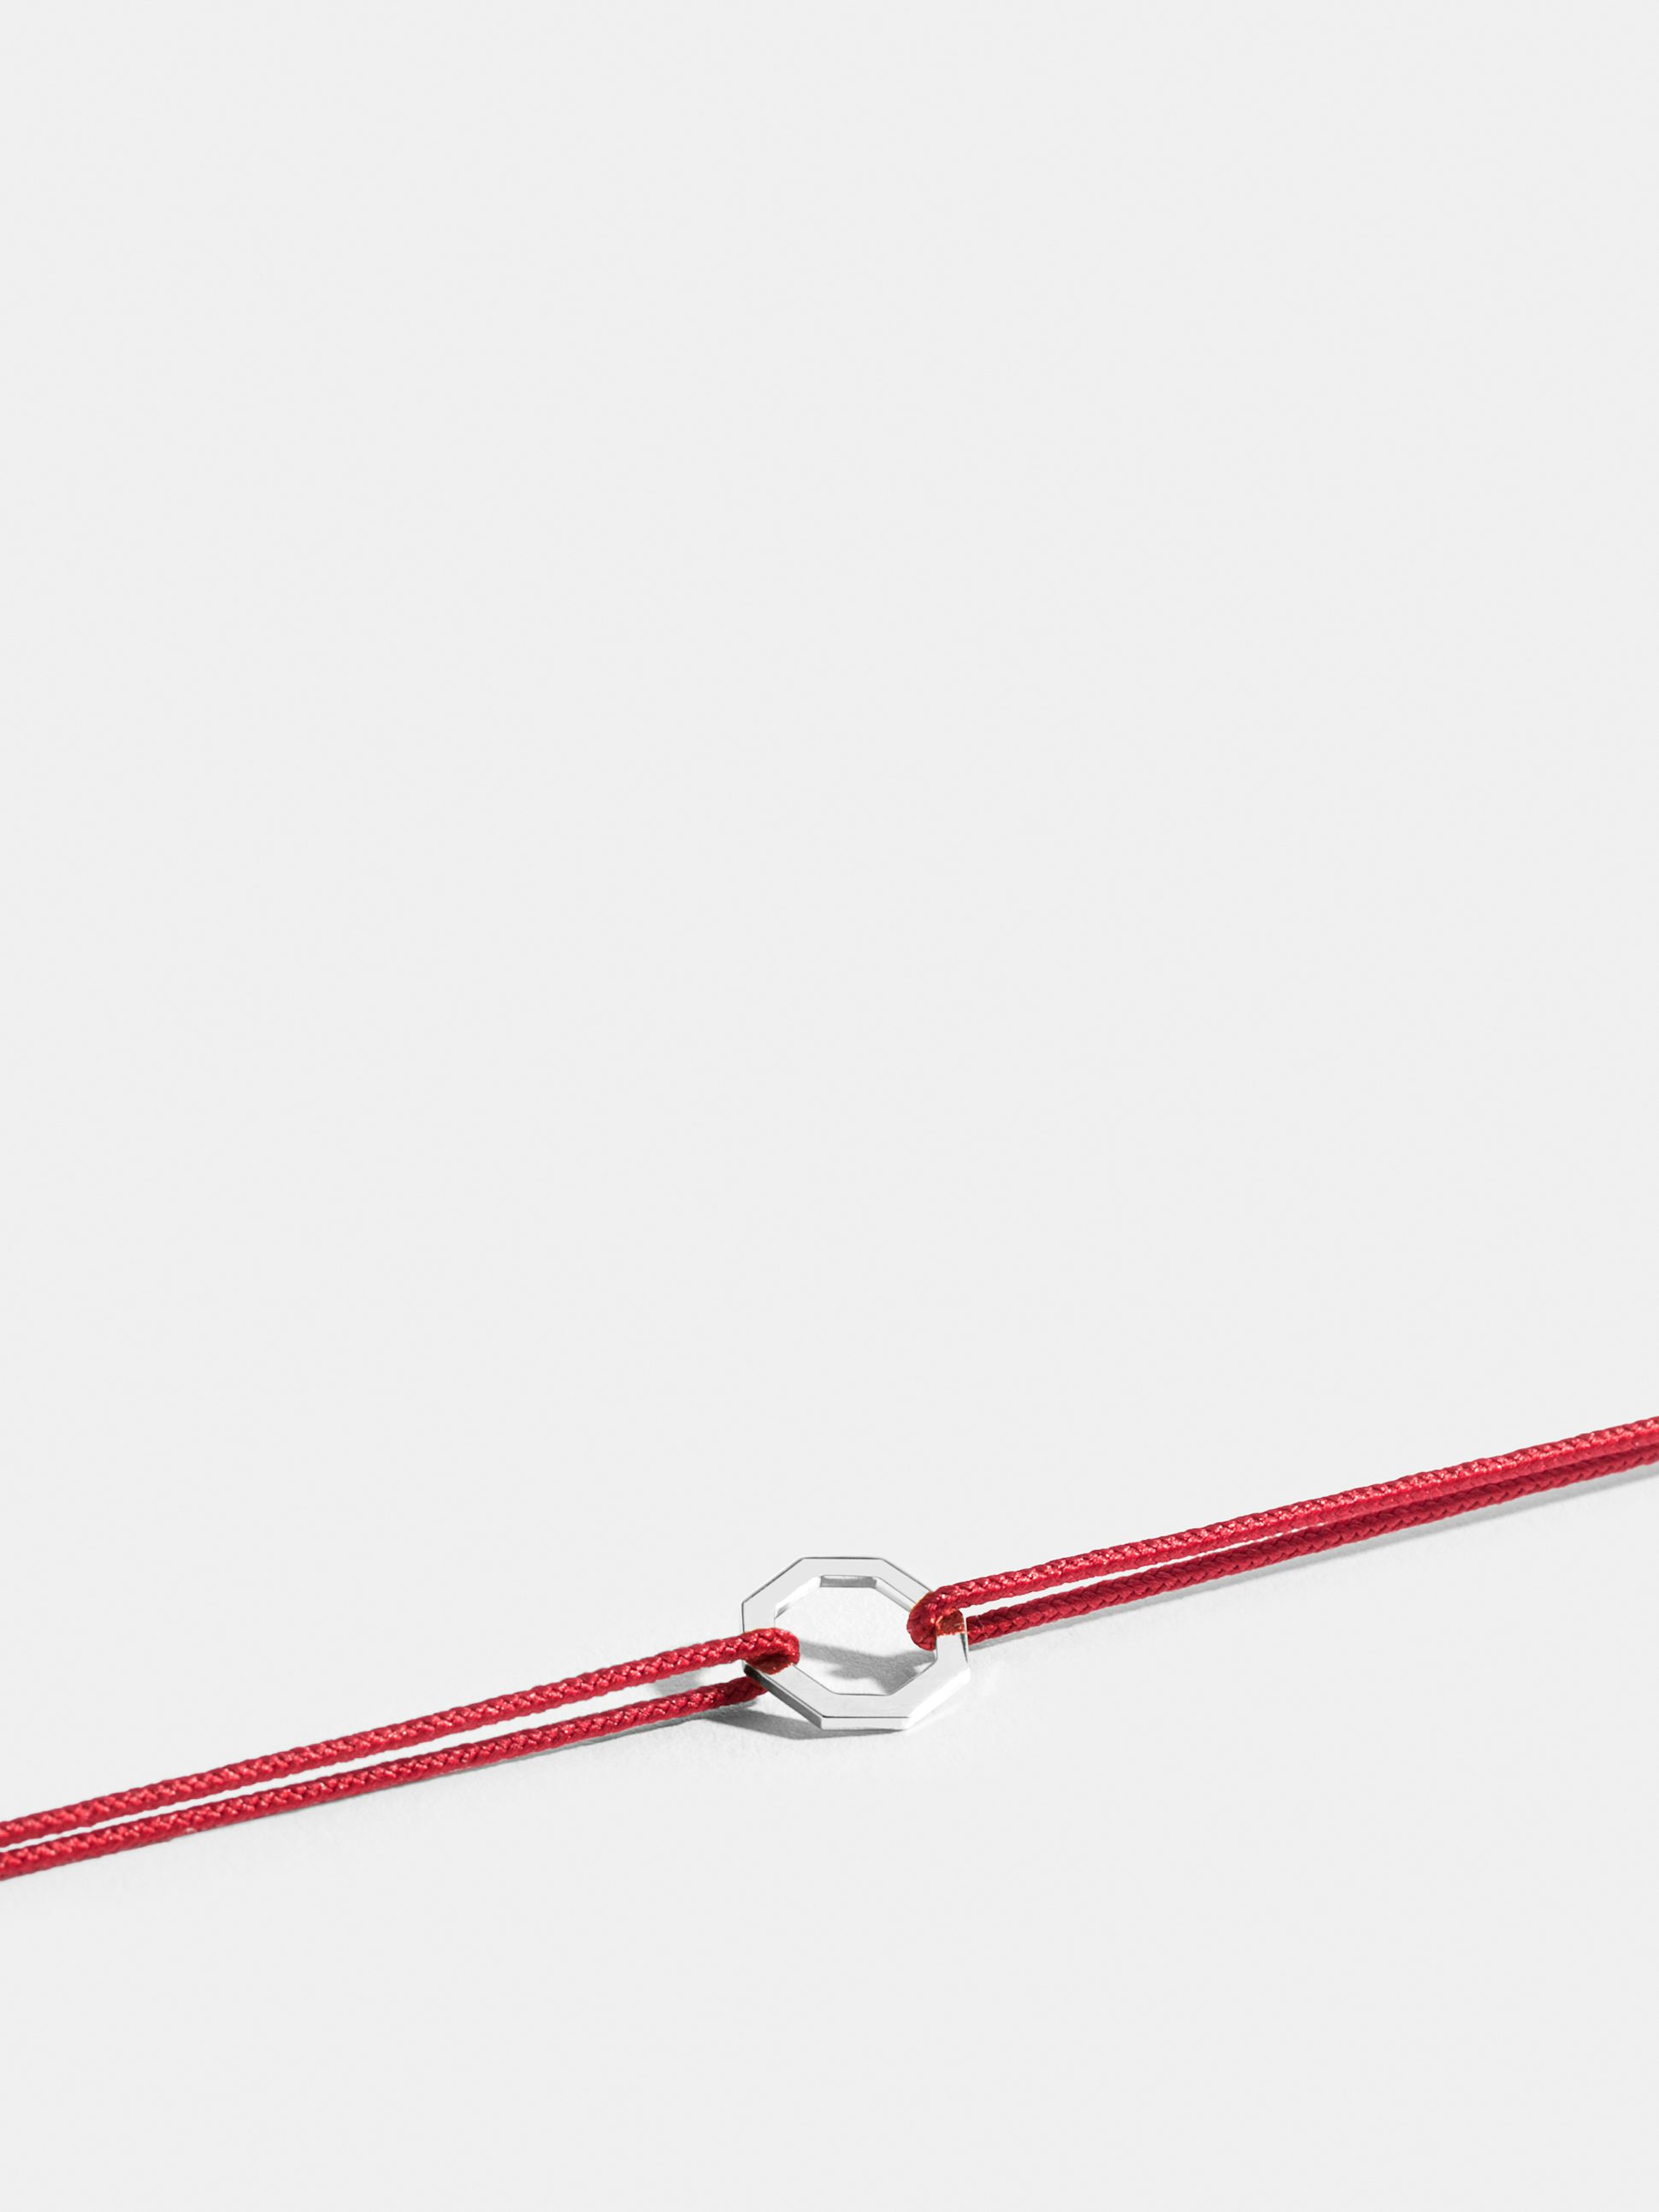 Octogone motif in 18k Fairmined ethical white gold, on a poppy red cord. 